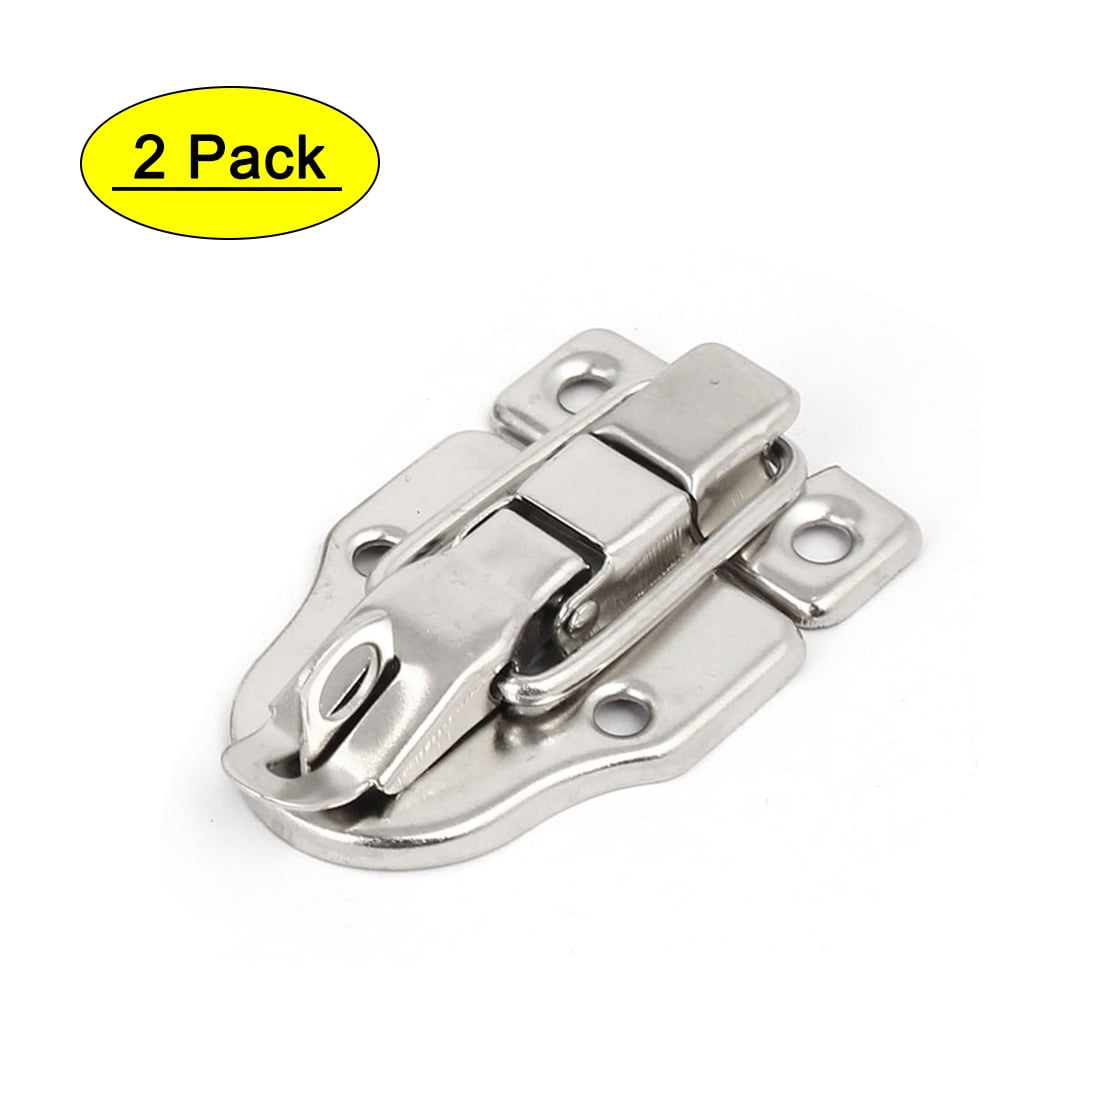 Uxcell a14050900ux0682 Marine Compression Spring Metal Tensioning Suitcase Draw Latch 2 Pcs Pack of 2 